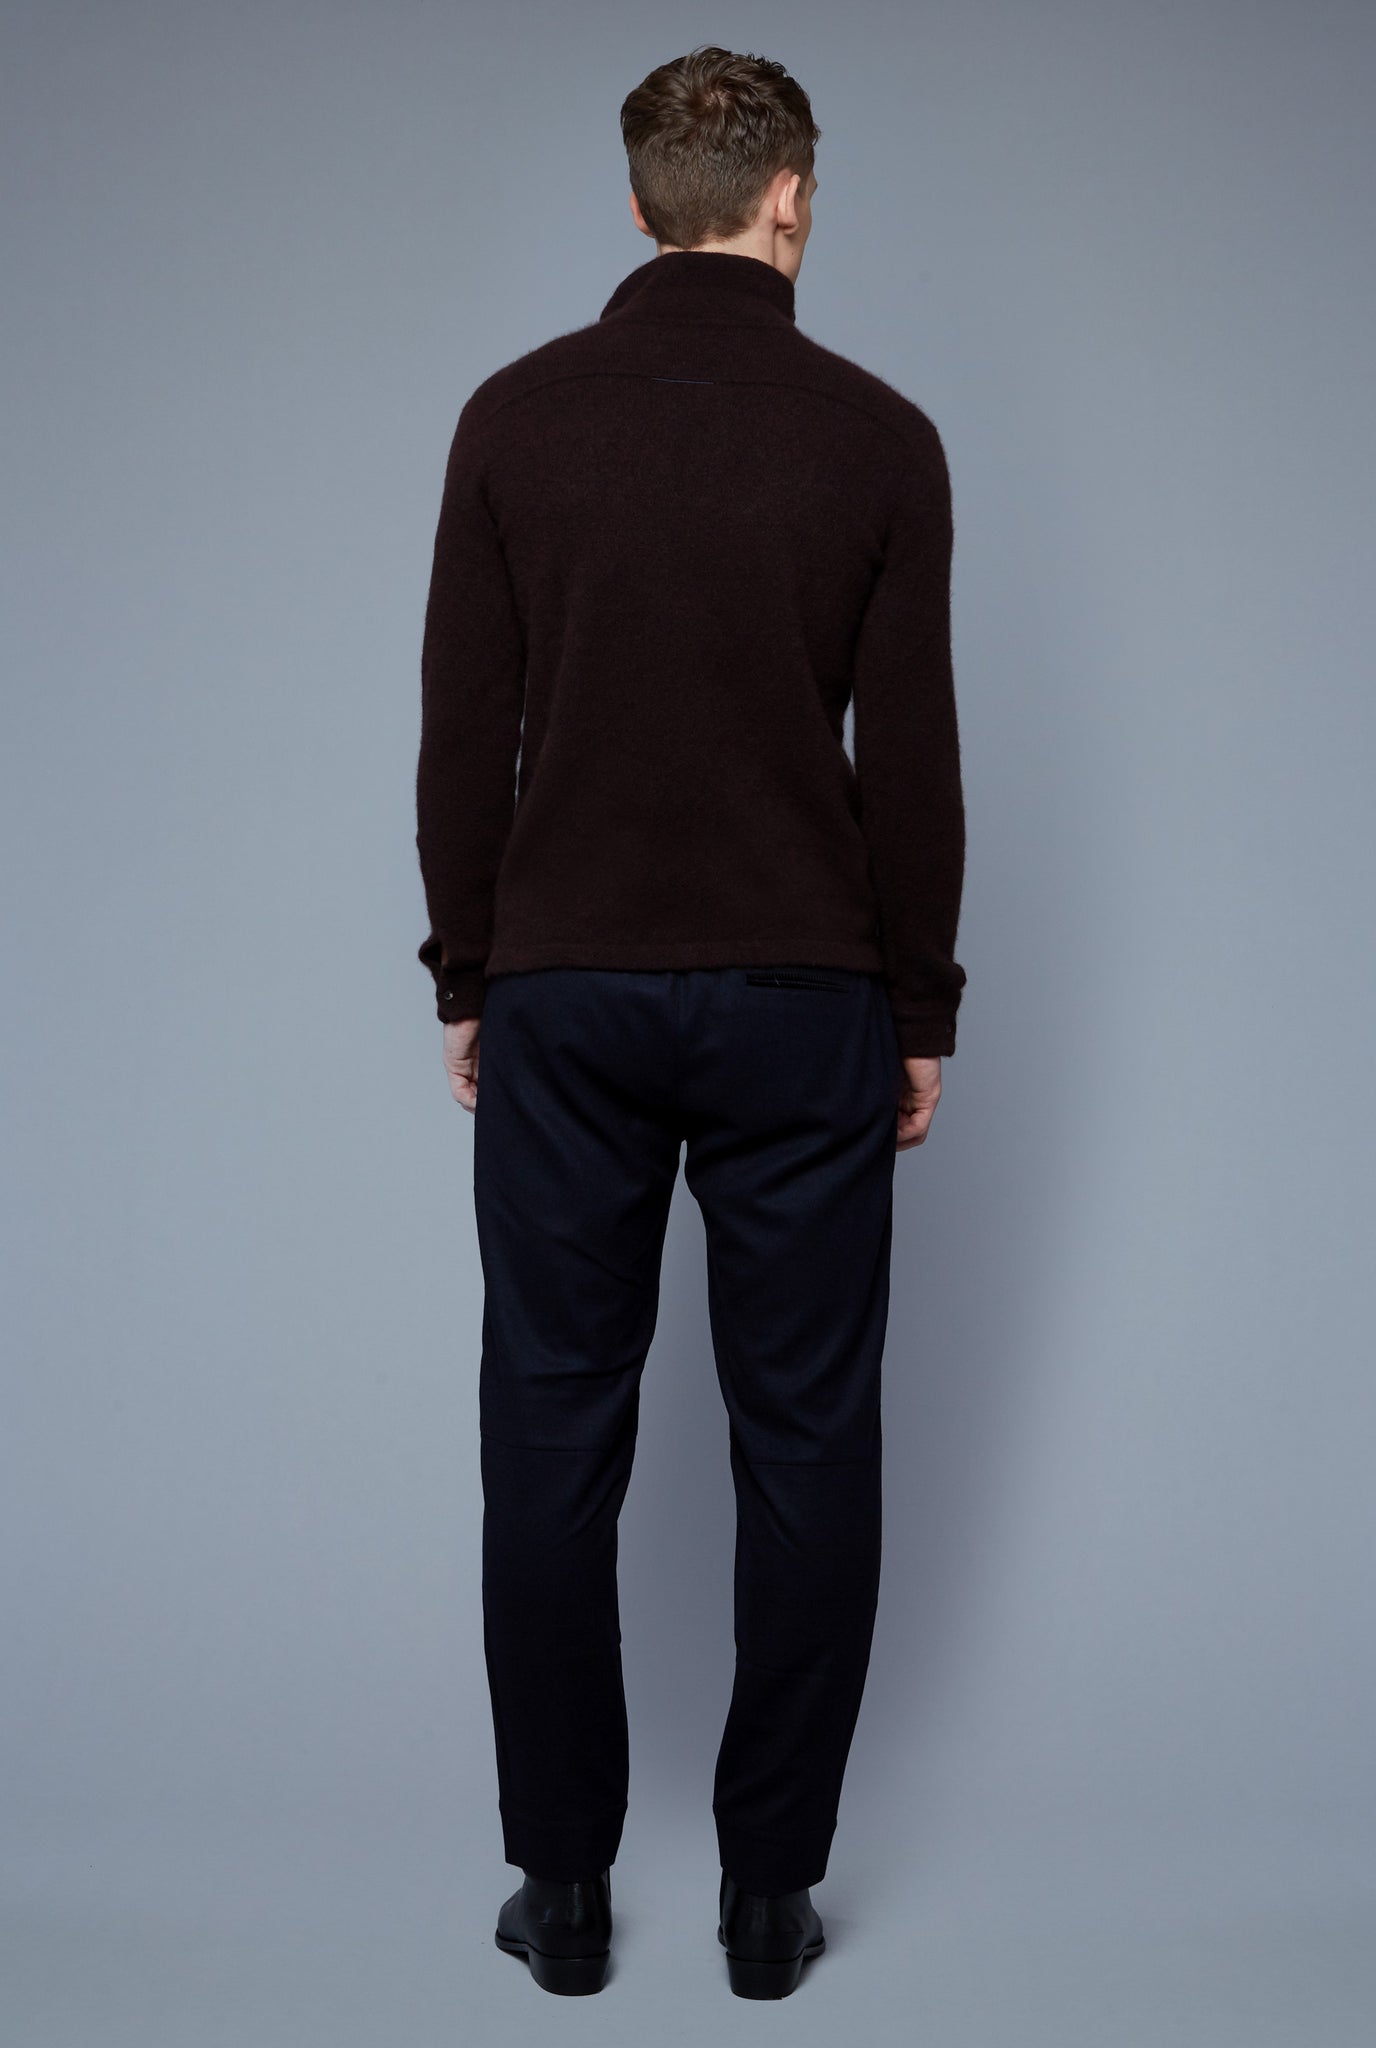 Back View: Model Milos Drago wearing Cashmere Boucle Sweater